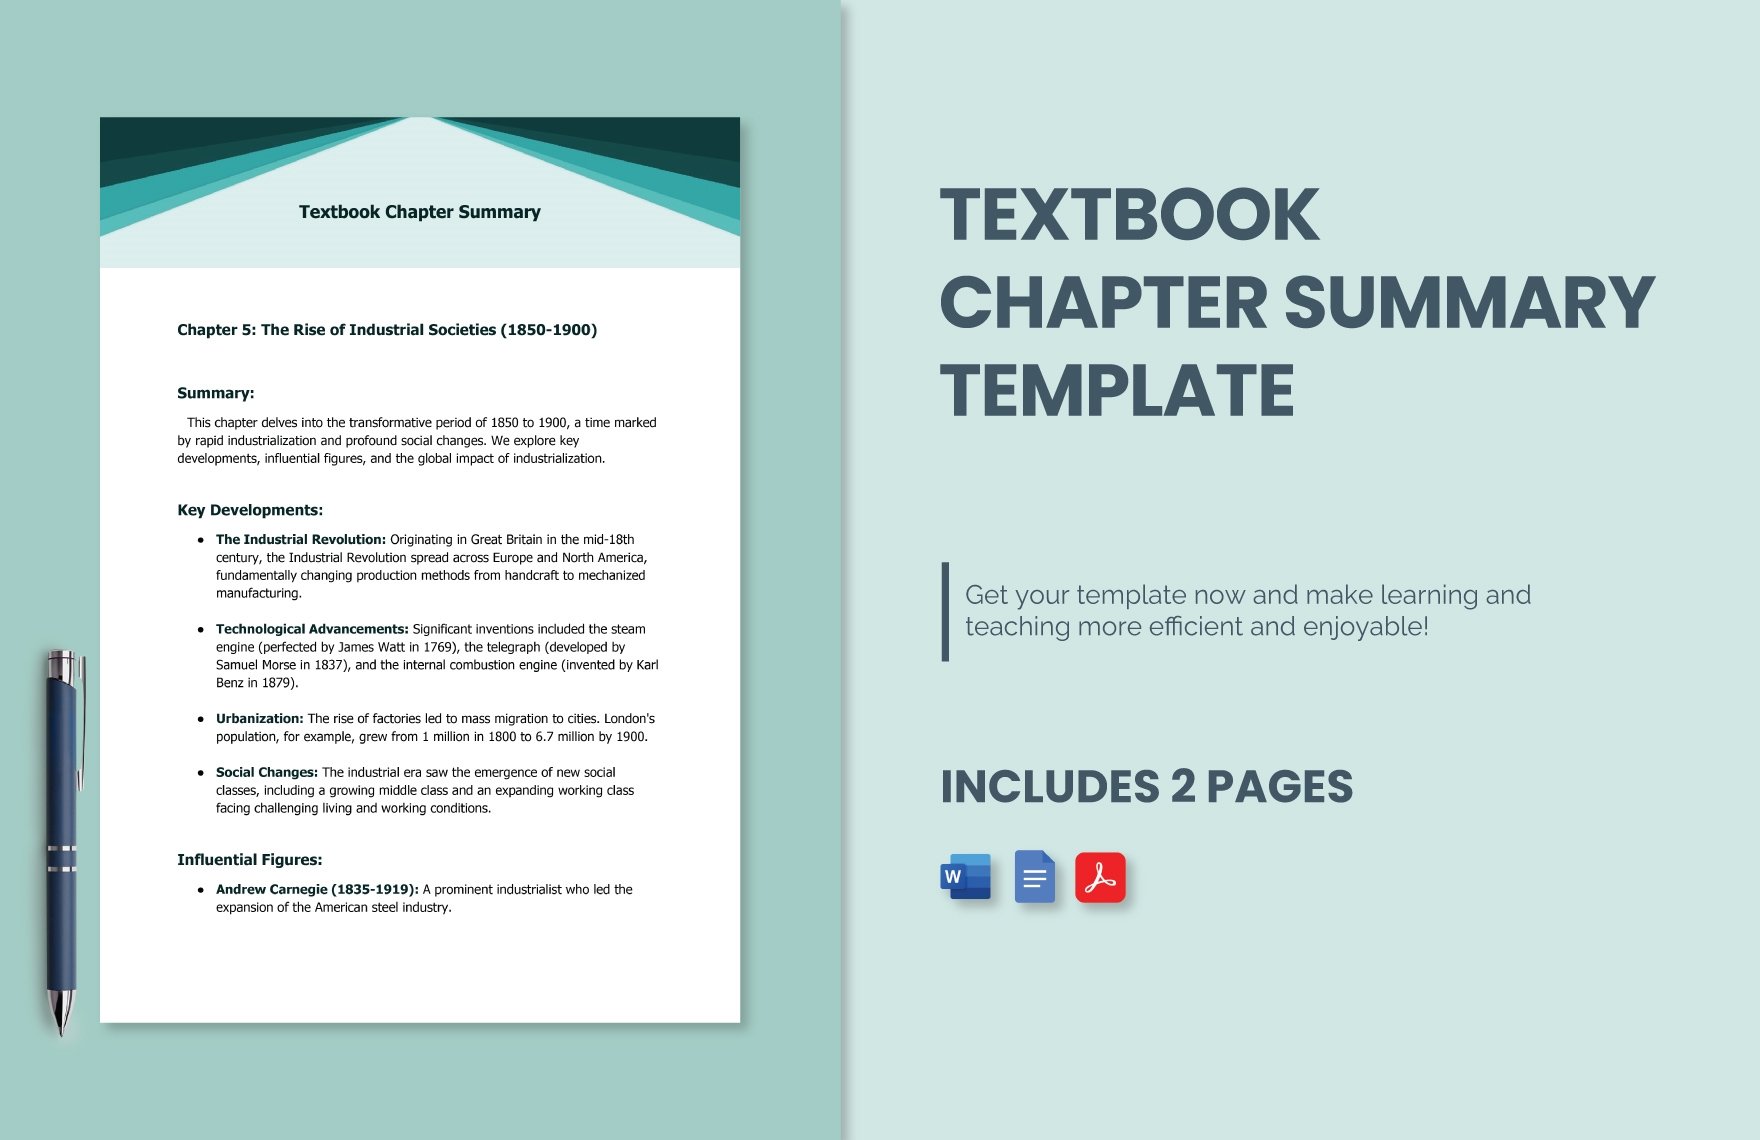 Textbook Chapter Summary Template